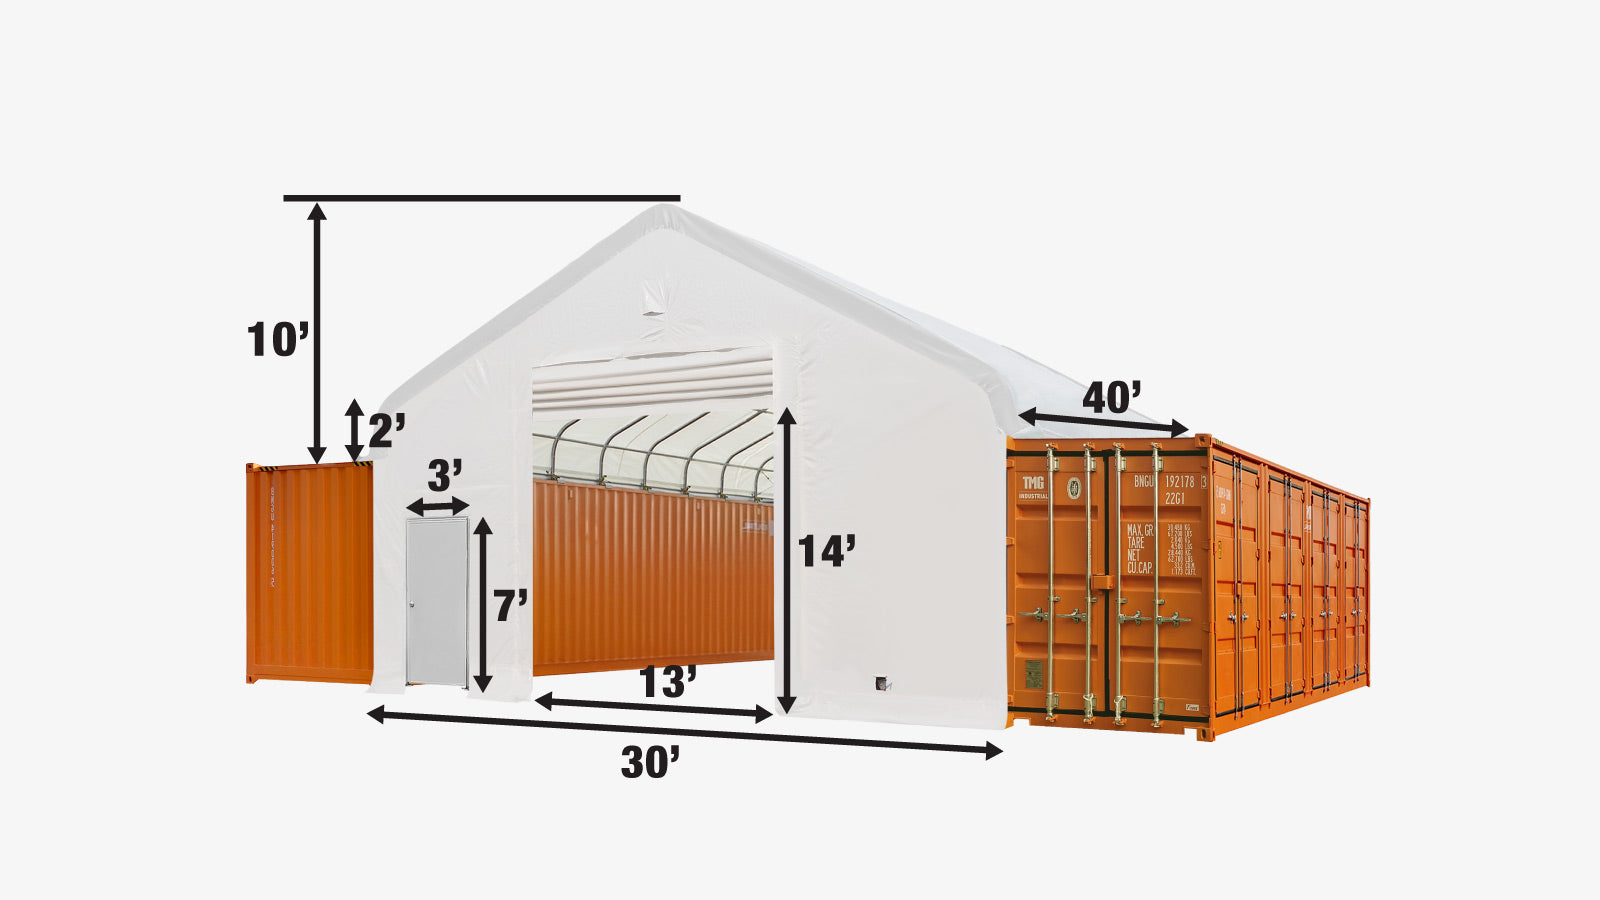 TMG Industrial Front & Back End Wall Kit, Custom Cut for TMG-ST3041CV Container Peak Roof Shelter Pro Series, Front wall with mechanical rollup door, Steel Man Door, Rear closed wall, 17 oz PVC, TMG-ST30CFB-specifications-image